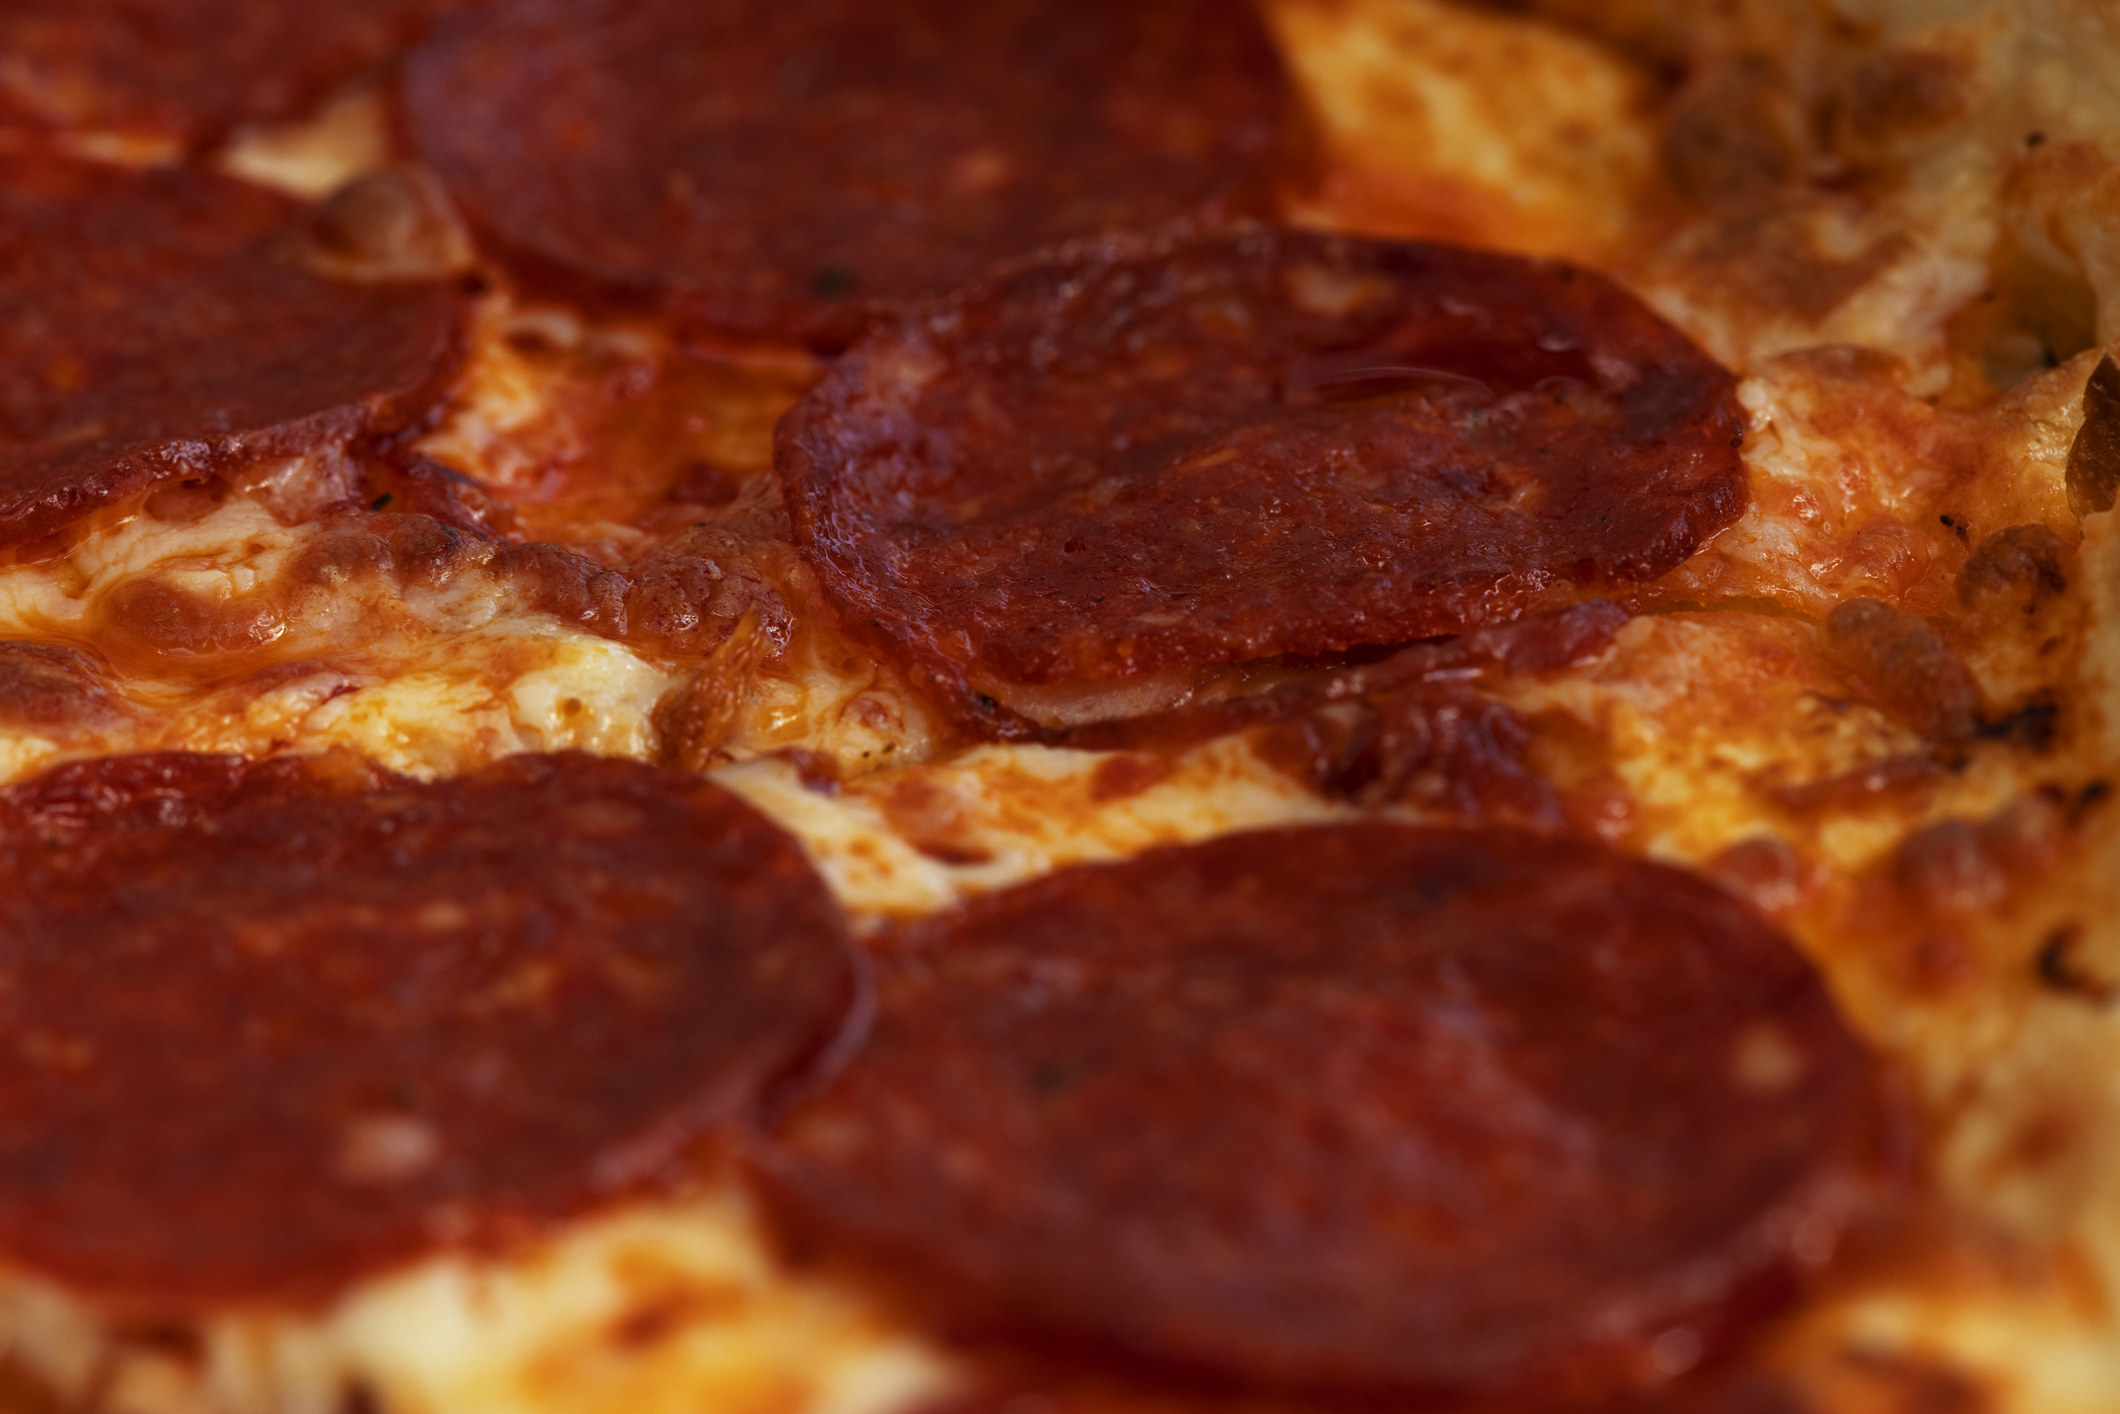 Slice of pizza with pepperoni.